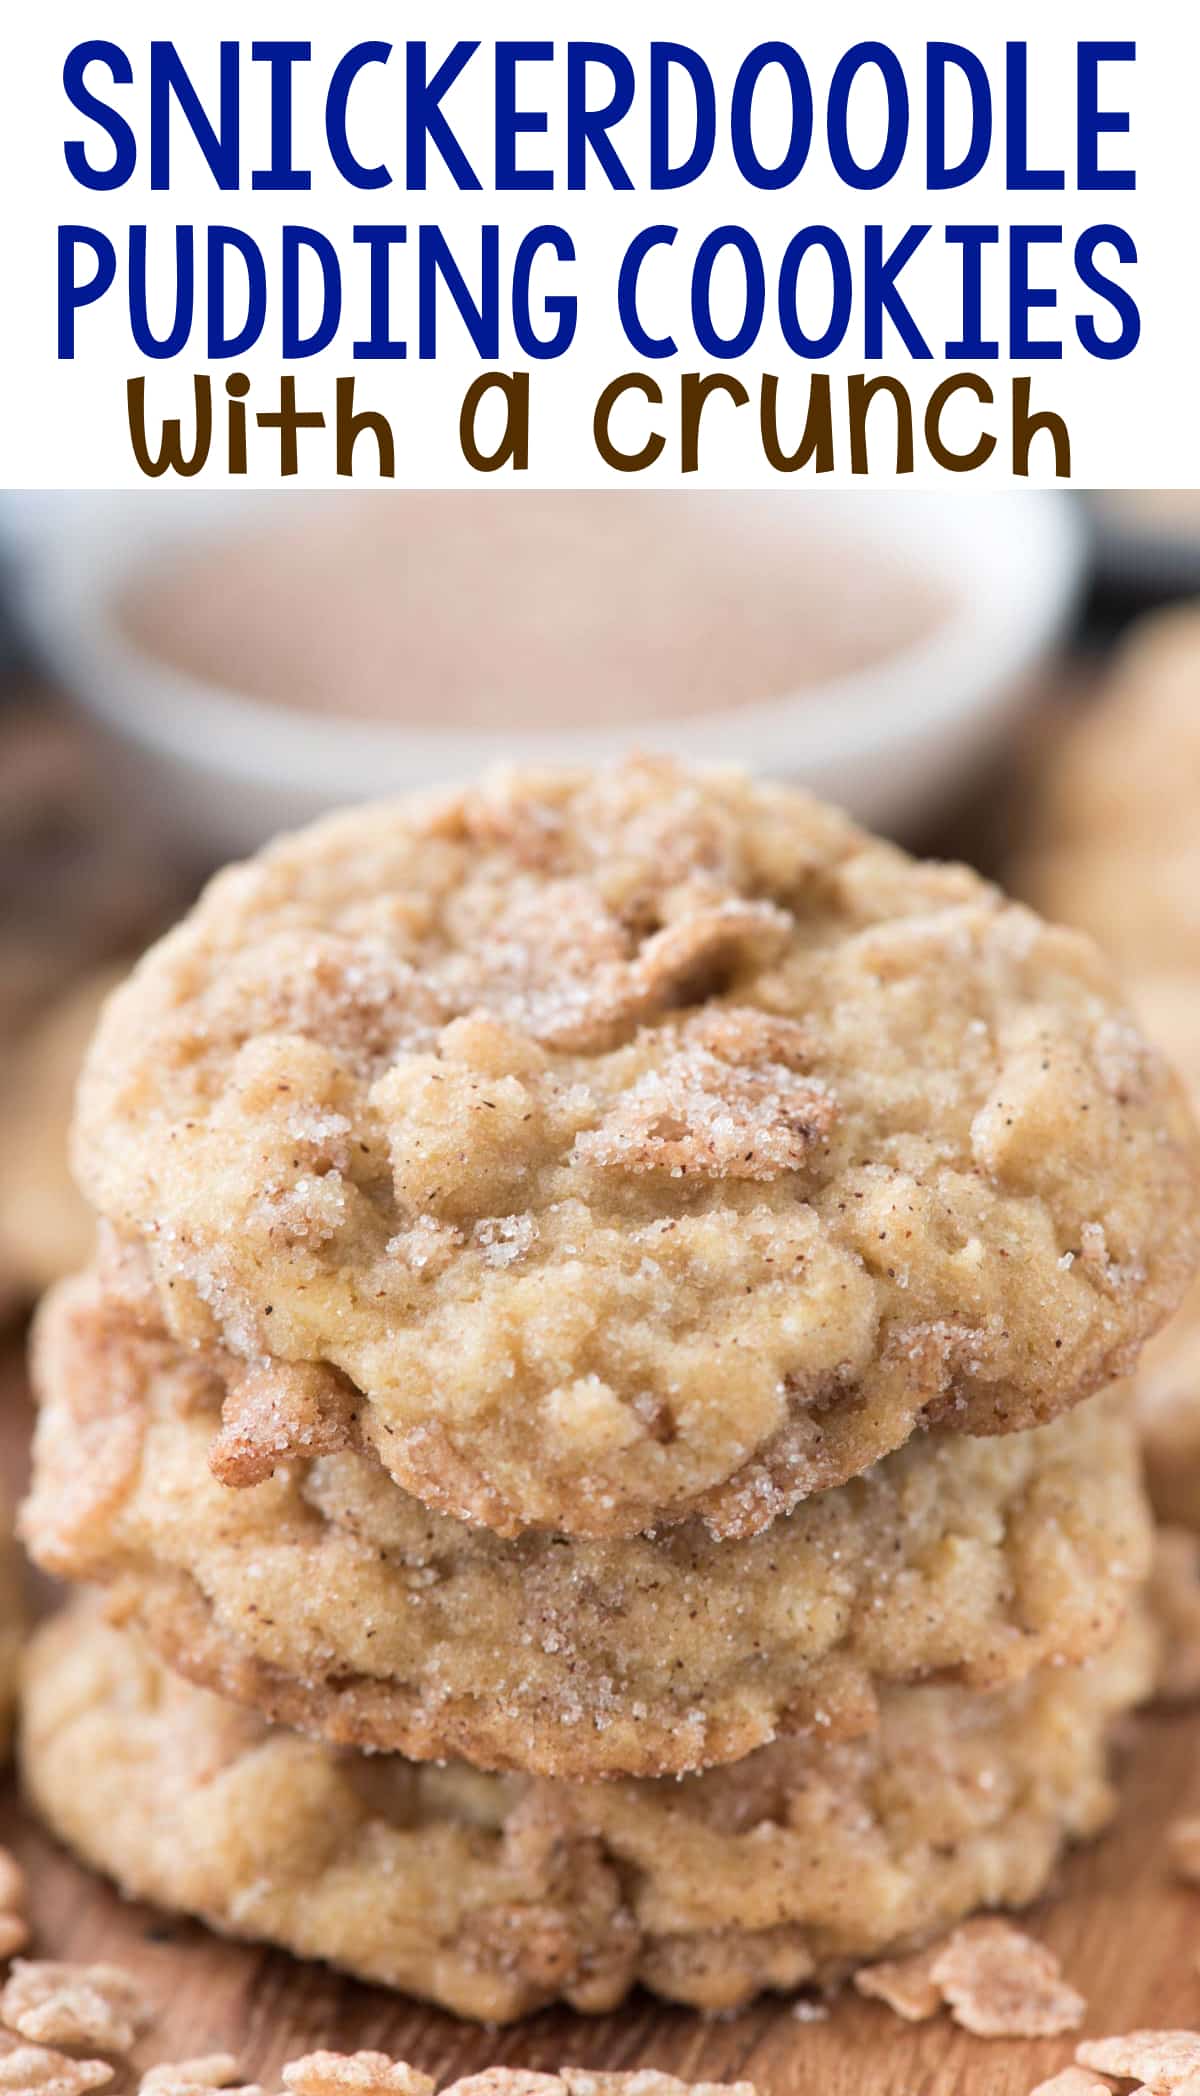 Snickerdoodle Crunch Pudding Cookies - this EASY pudding cookie recipe is a soft cookie full of crunchy cinnamon cereal and coated in cinnamon sugar! The perfect snickerdoodle recipe with a crunchy twist.